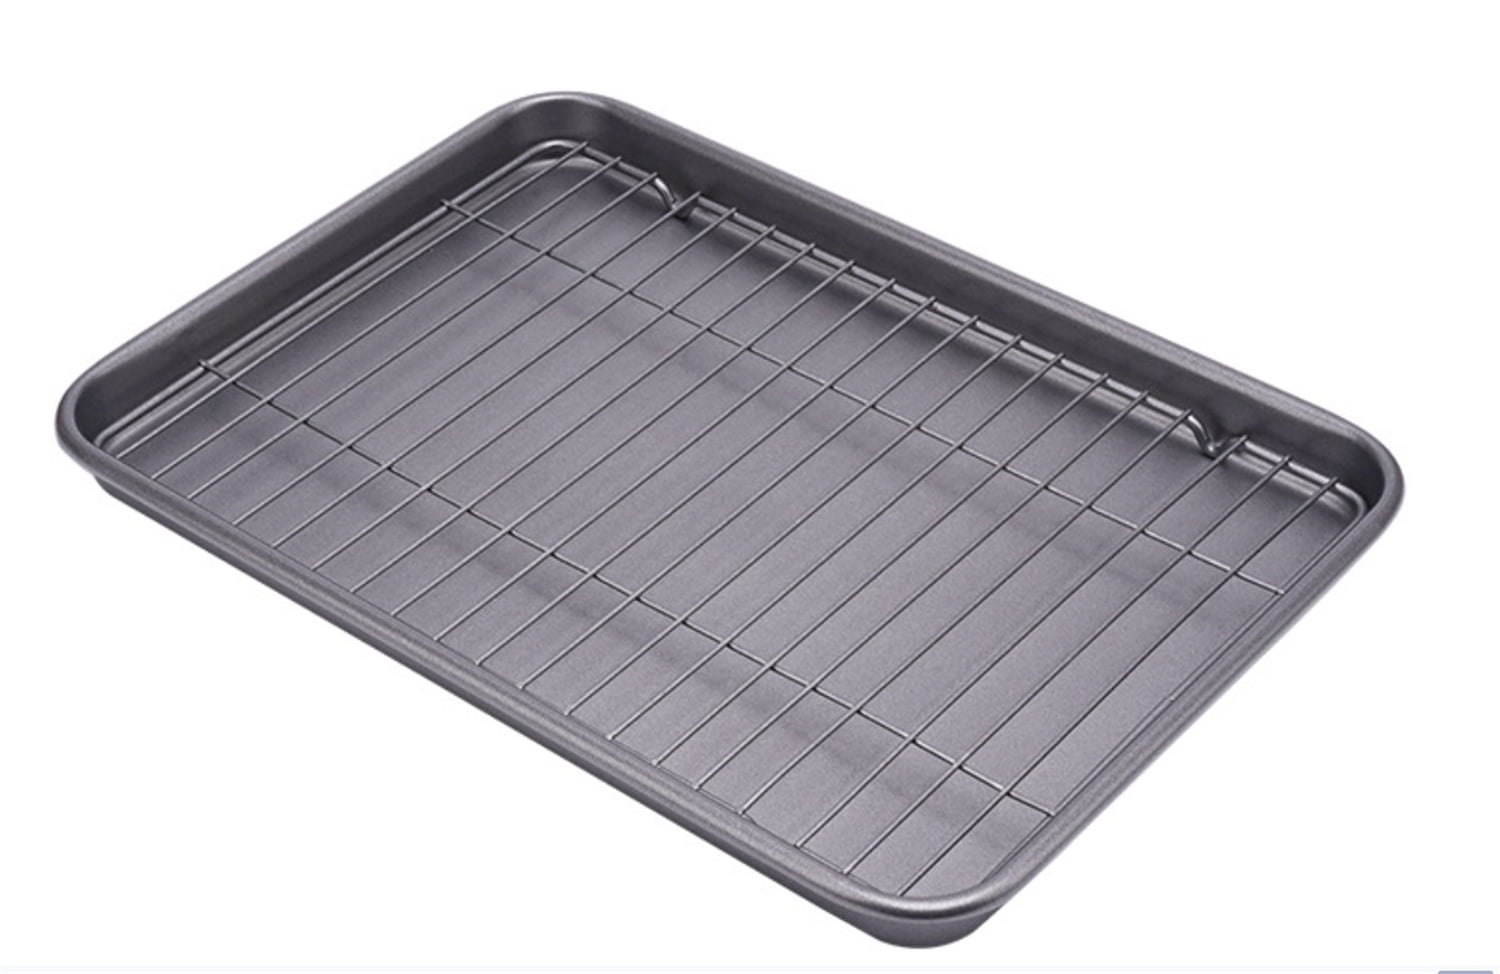 Casewin Baking Sheet Stainless Steel Baking Tray Cookie Sheet Oven Pan  Rectangle Size 10 x 8 x 1 inch, Non Toxic & Healthy, Rust Free & Less  Stick, Thick & Sturdy, Easy